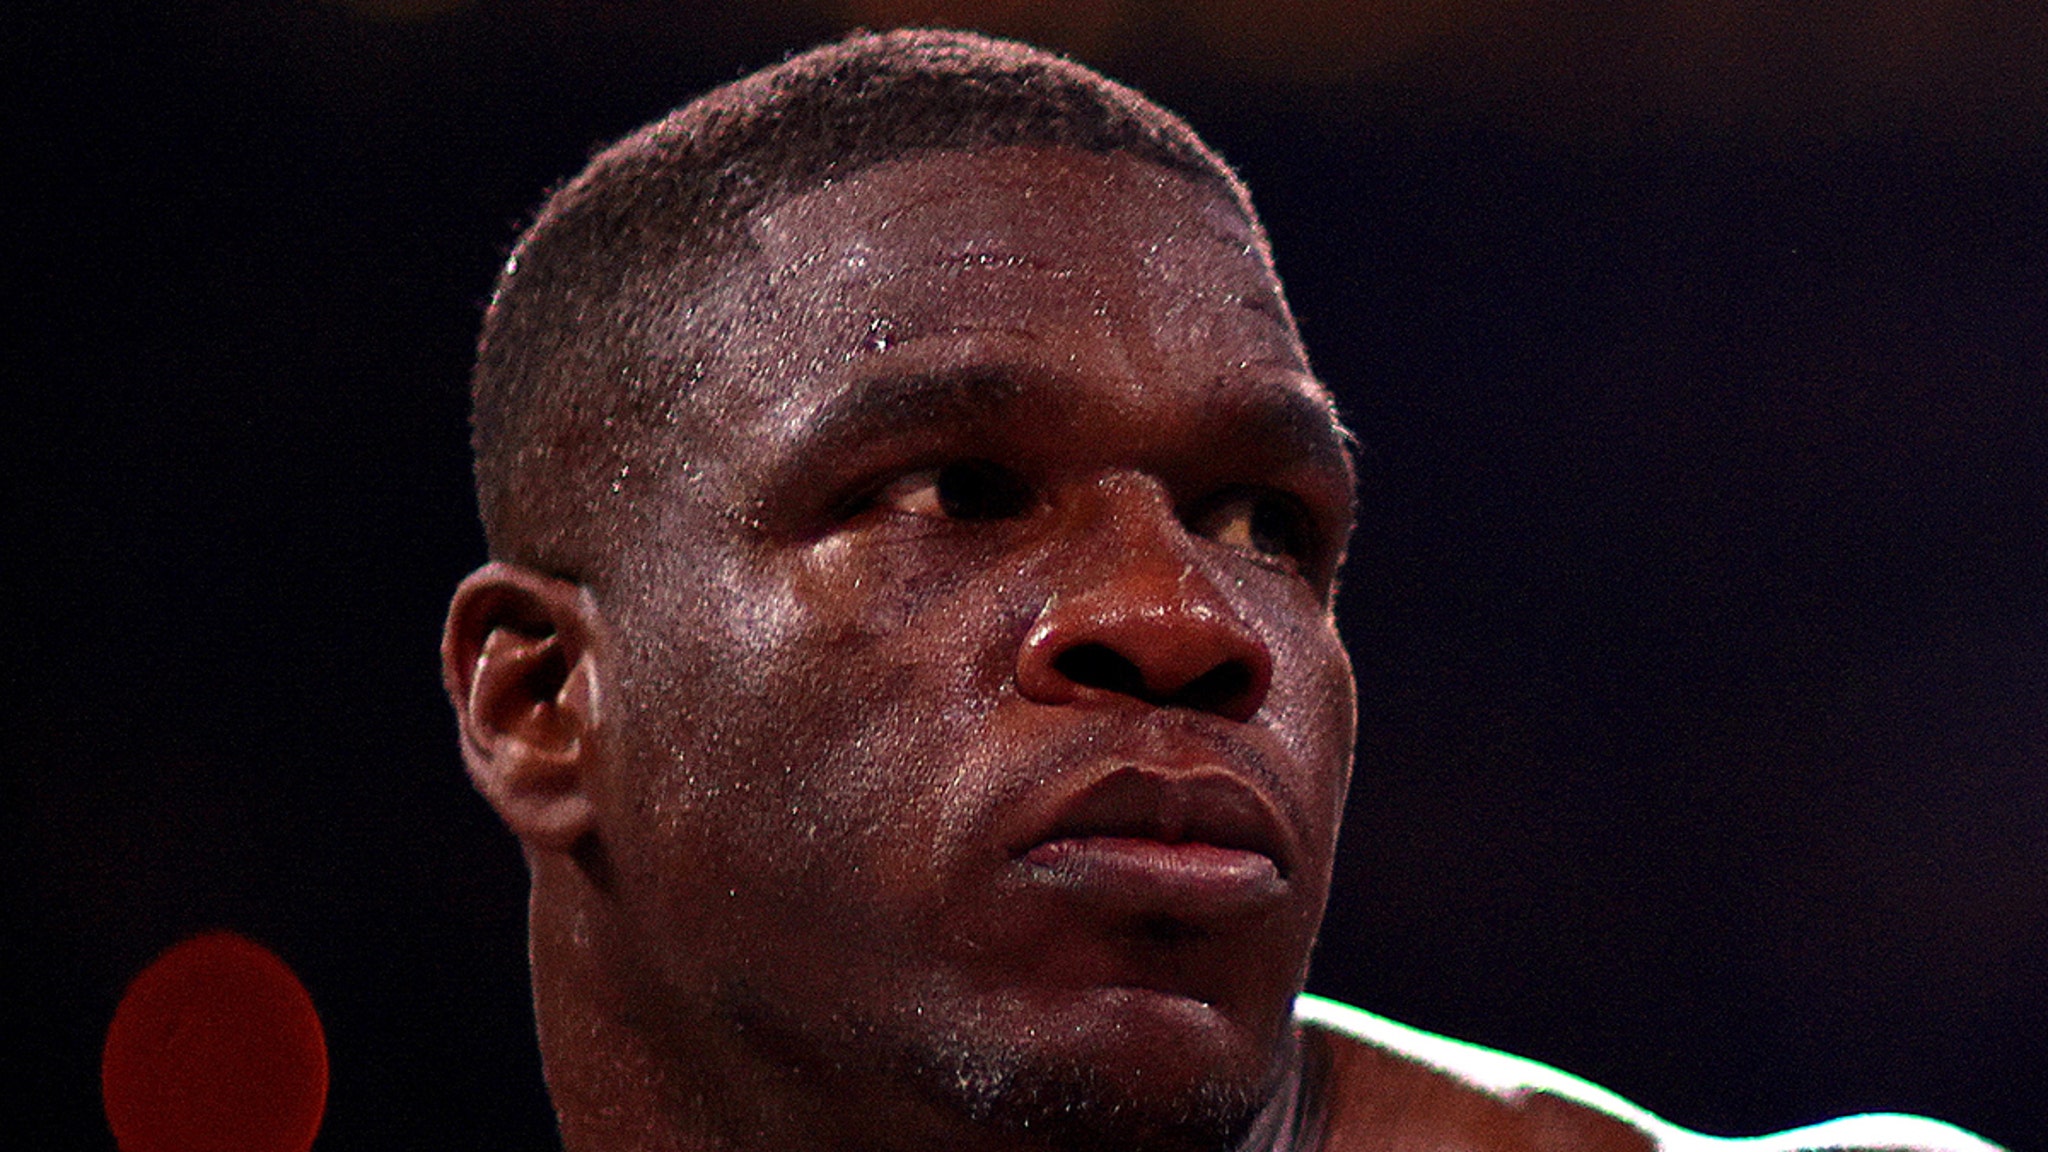 Frank Gore Allegedly Involved In Dom. Violence Incident, Charged W/ Simple Assault